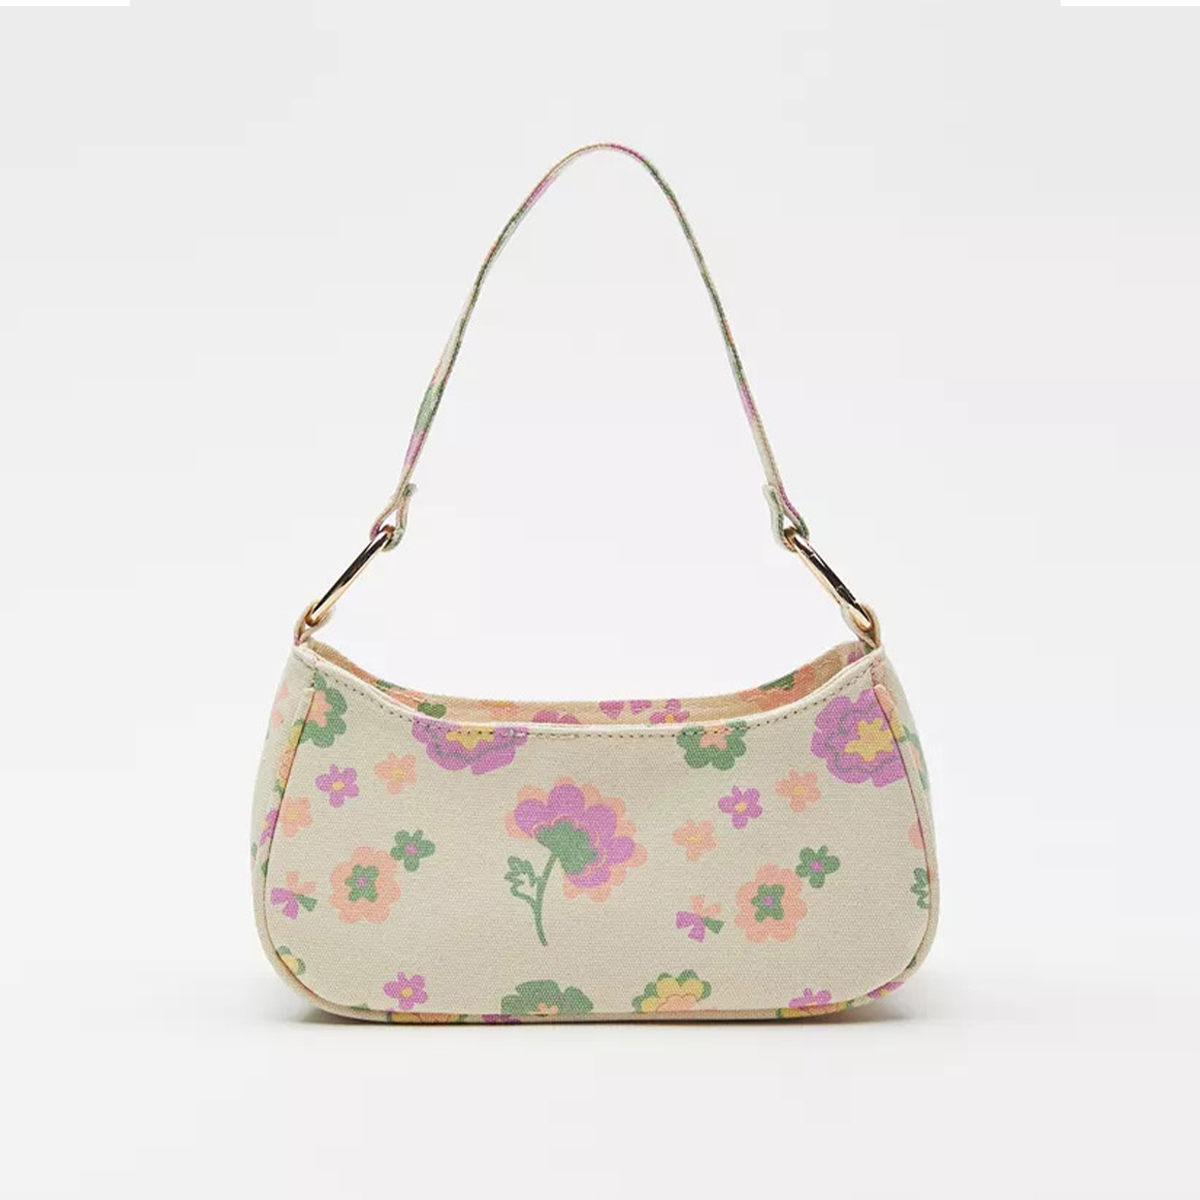 Urban Outfitters '70s Floral Baguette Bag